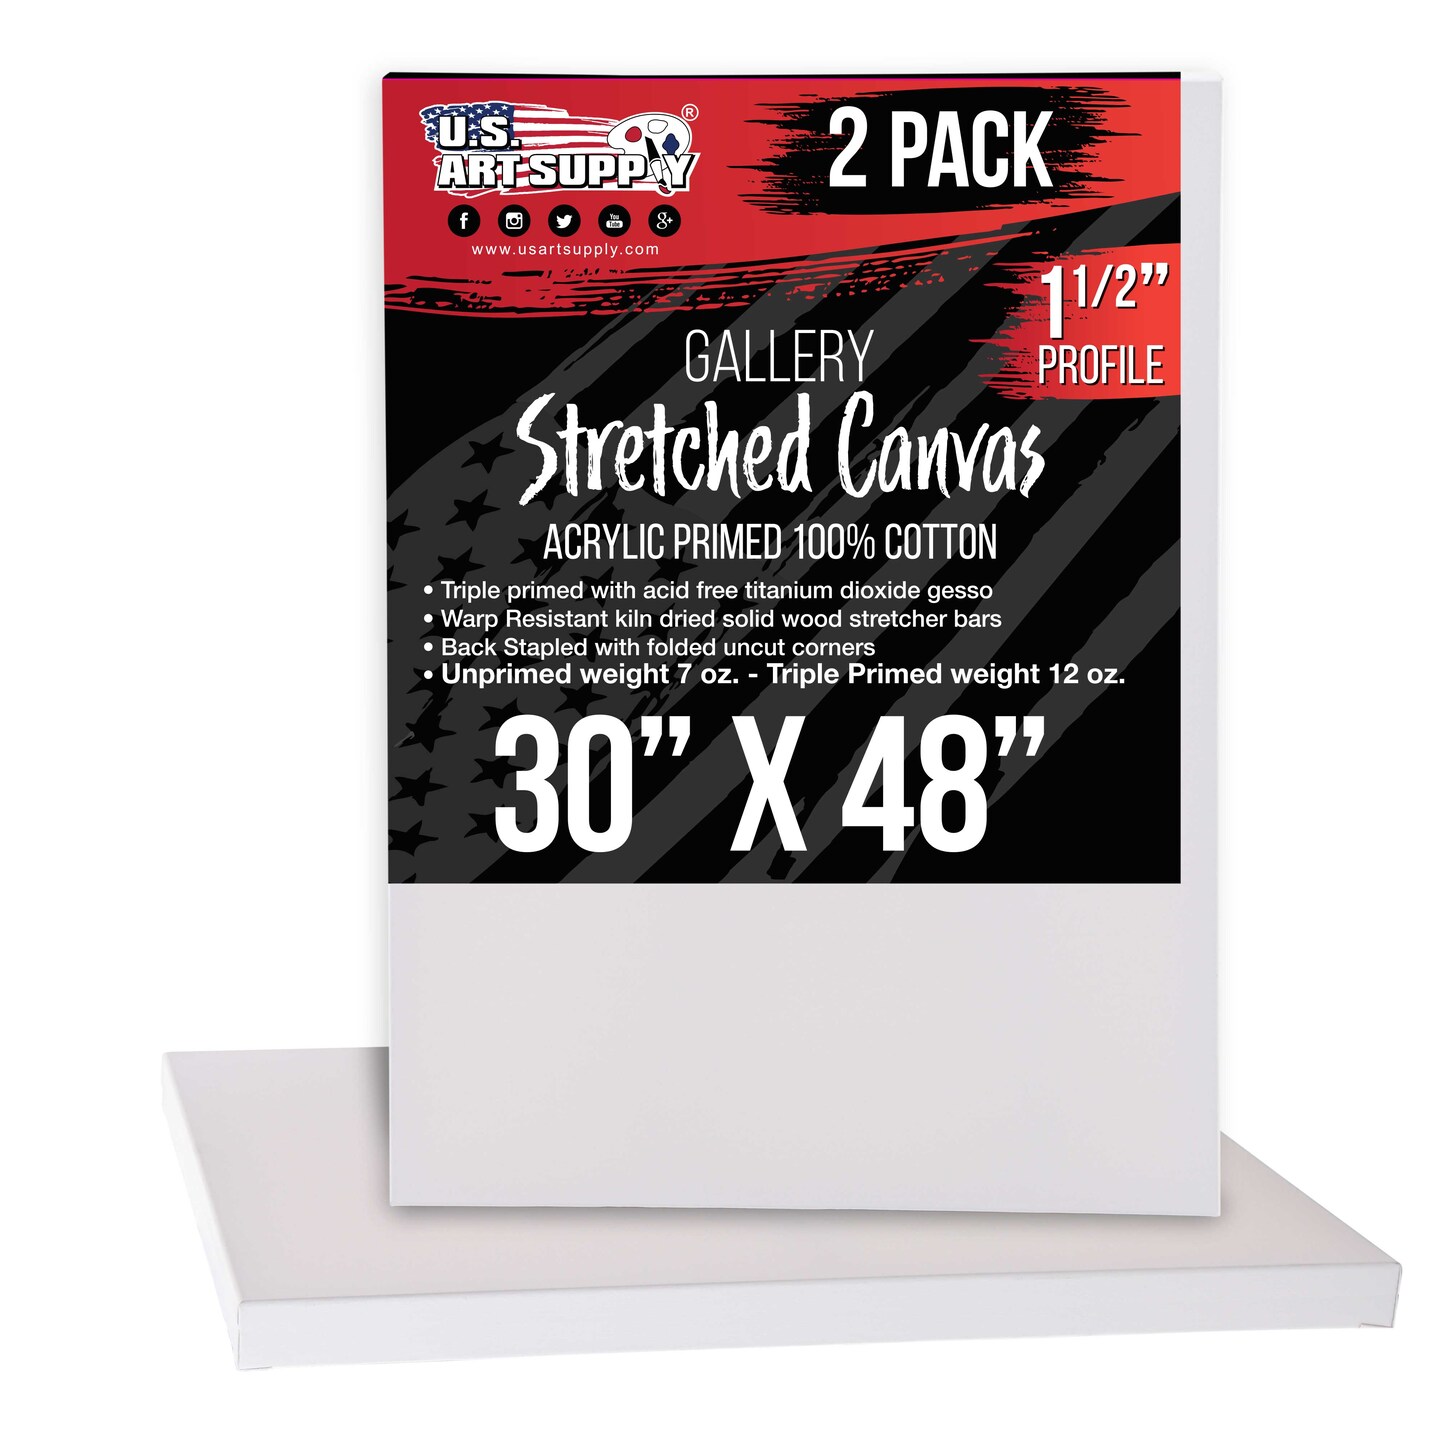 30 x 48 inch Gallery Depth 1-1/2&#x22; Profile Stretched Canvas, 2-Pack - 12-Ounce Acrylic Gesso Triple Primed, - Professional Artist Quality, 100% Cotton